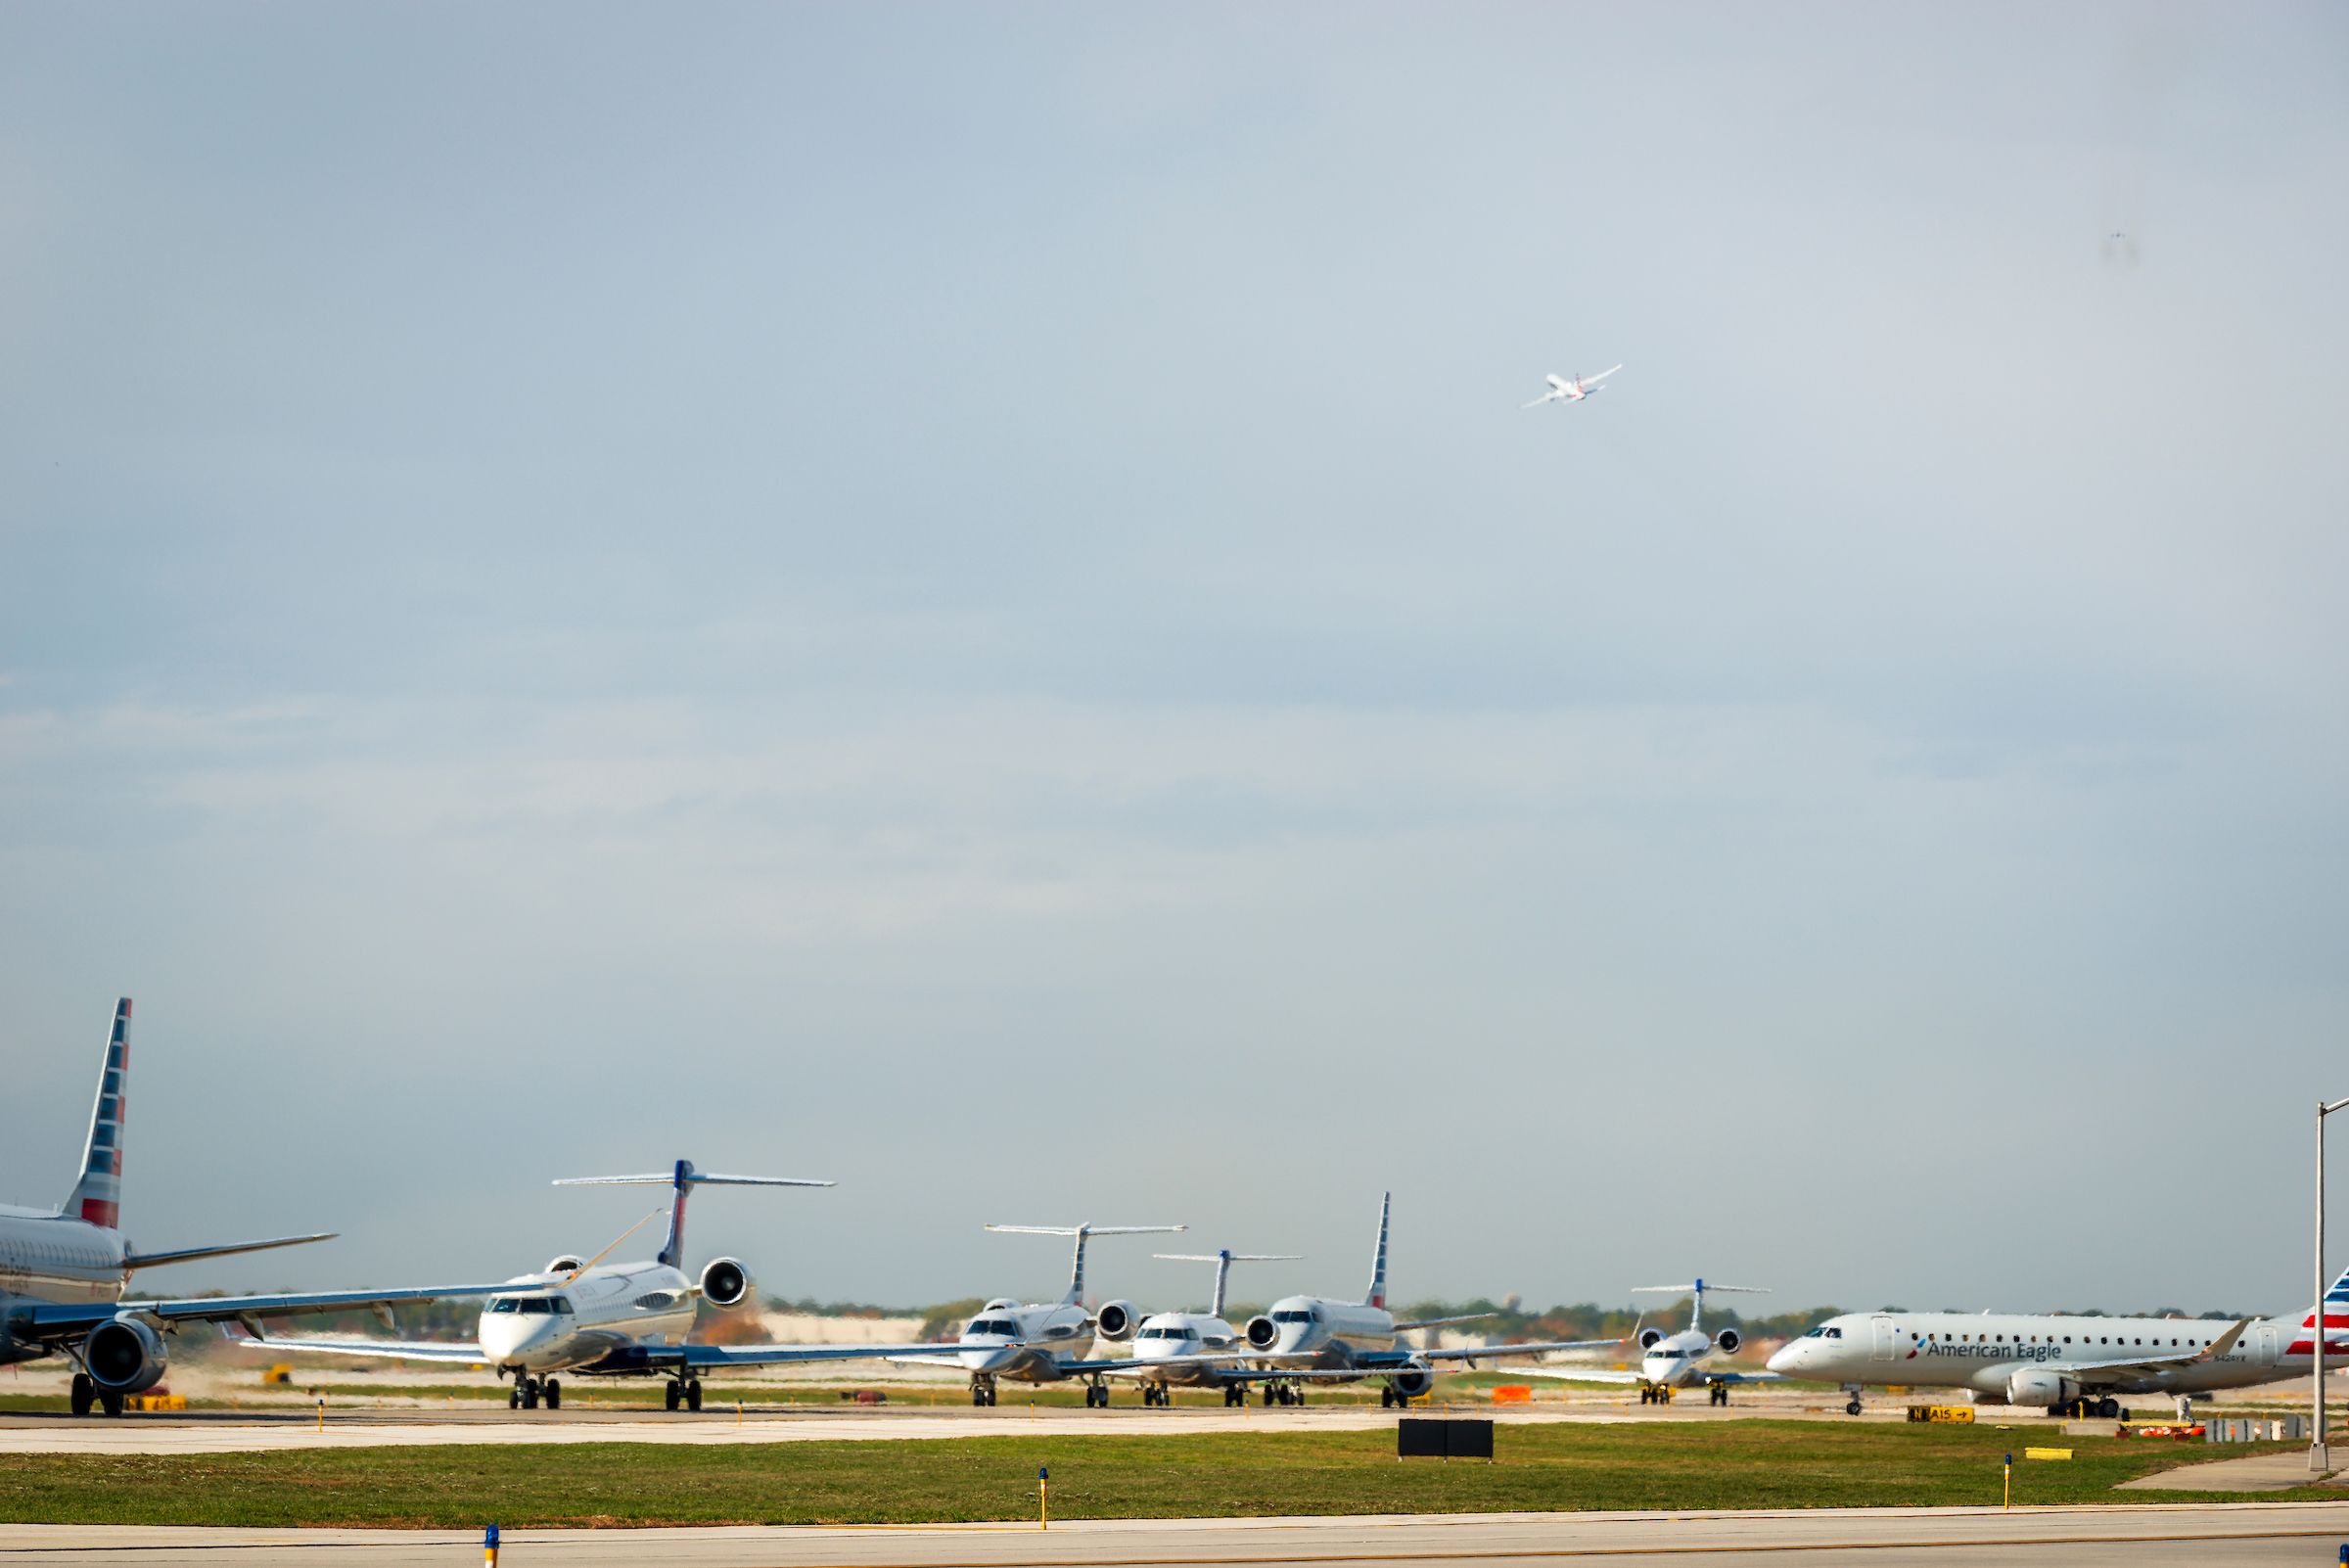 Planes taxiing at O'Hare.